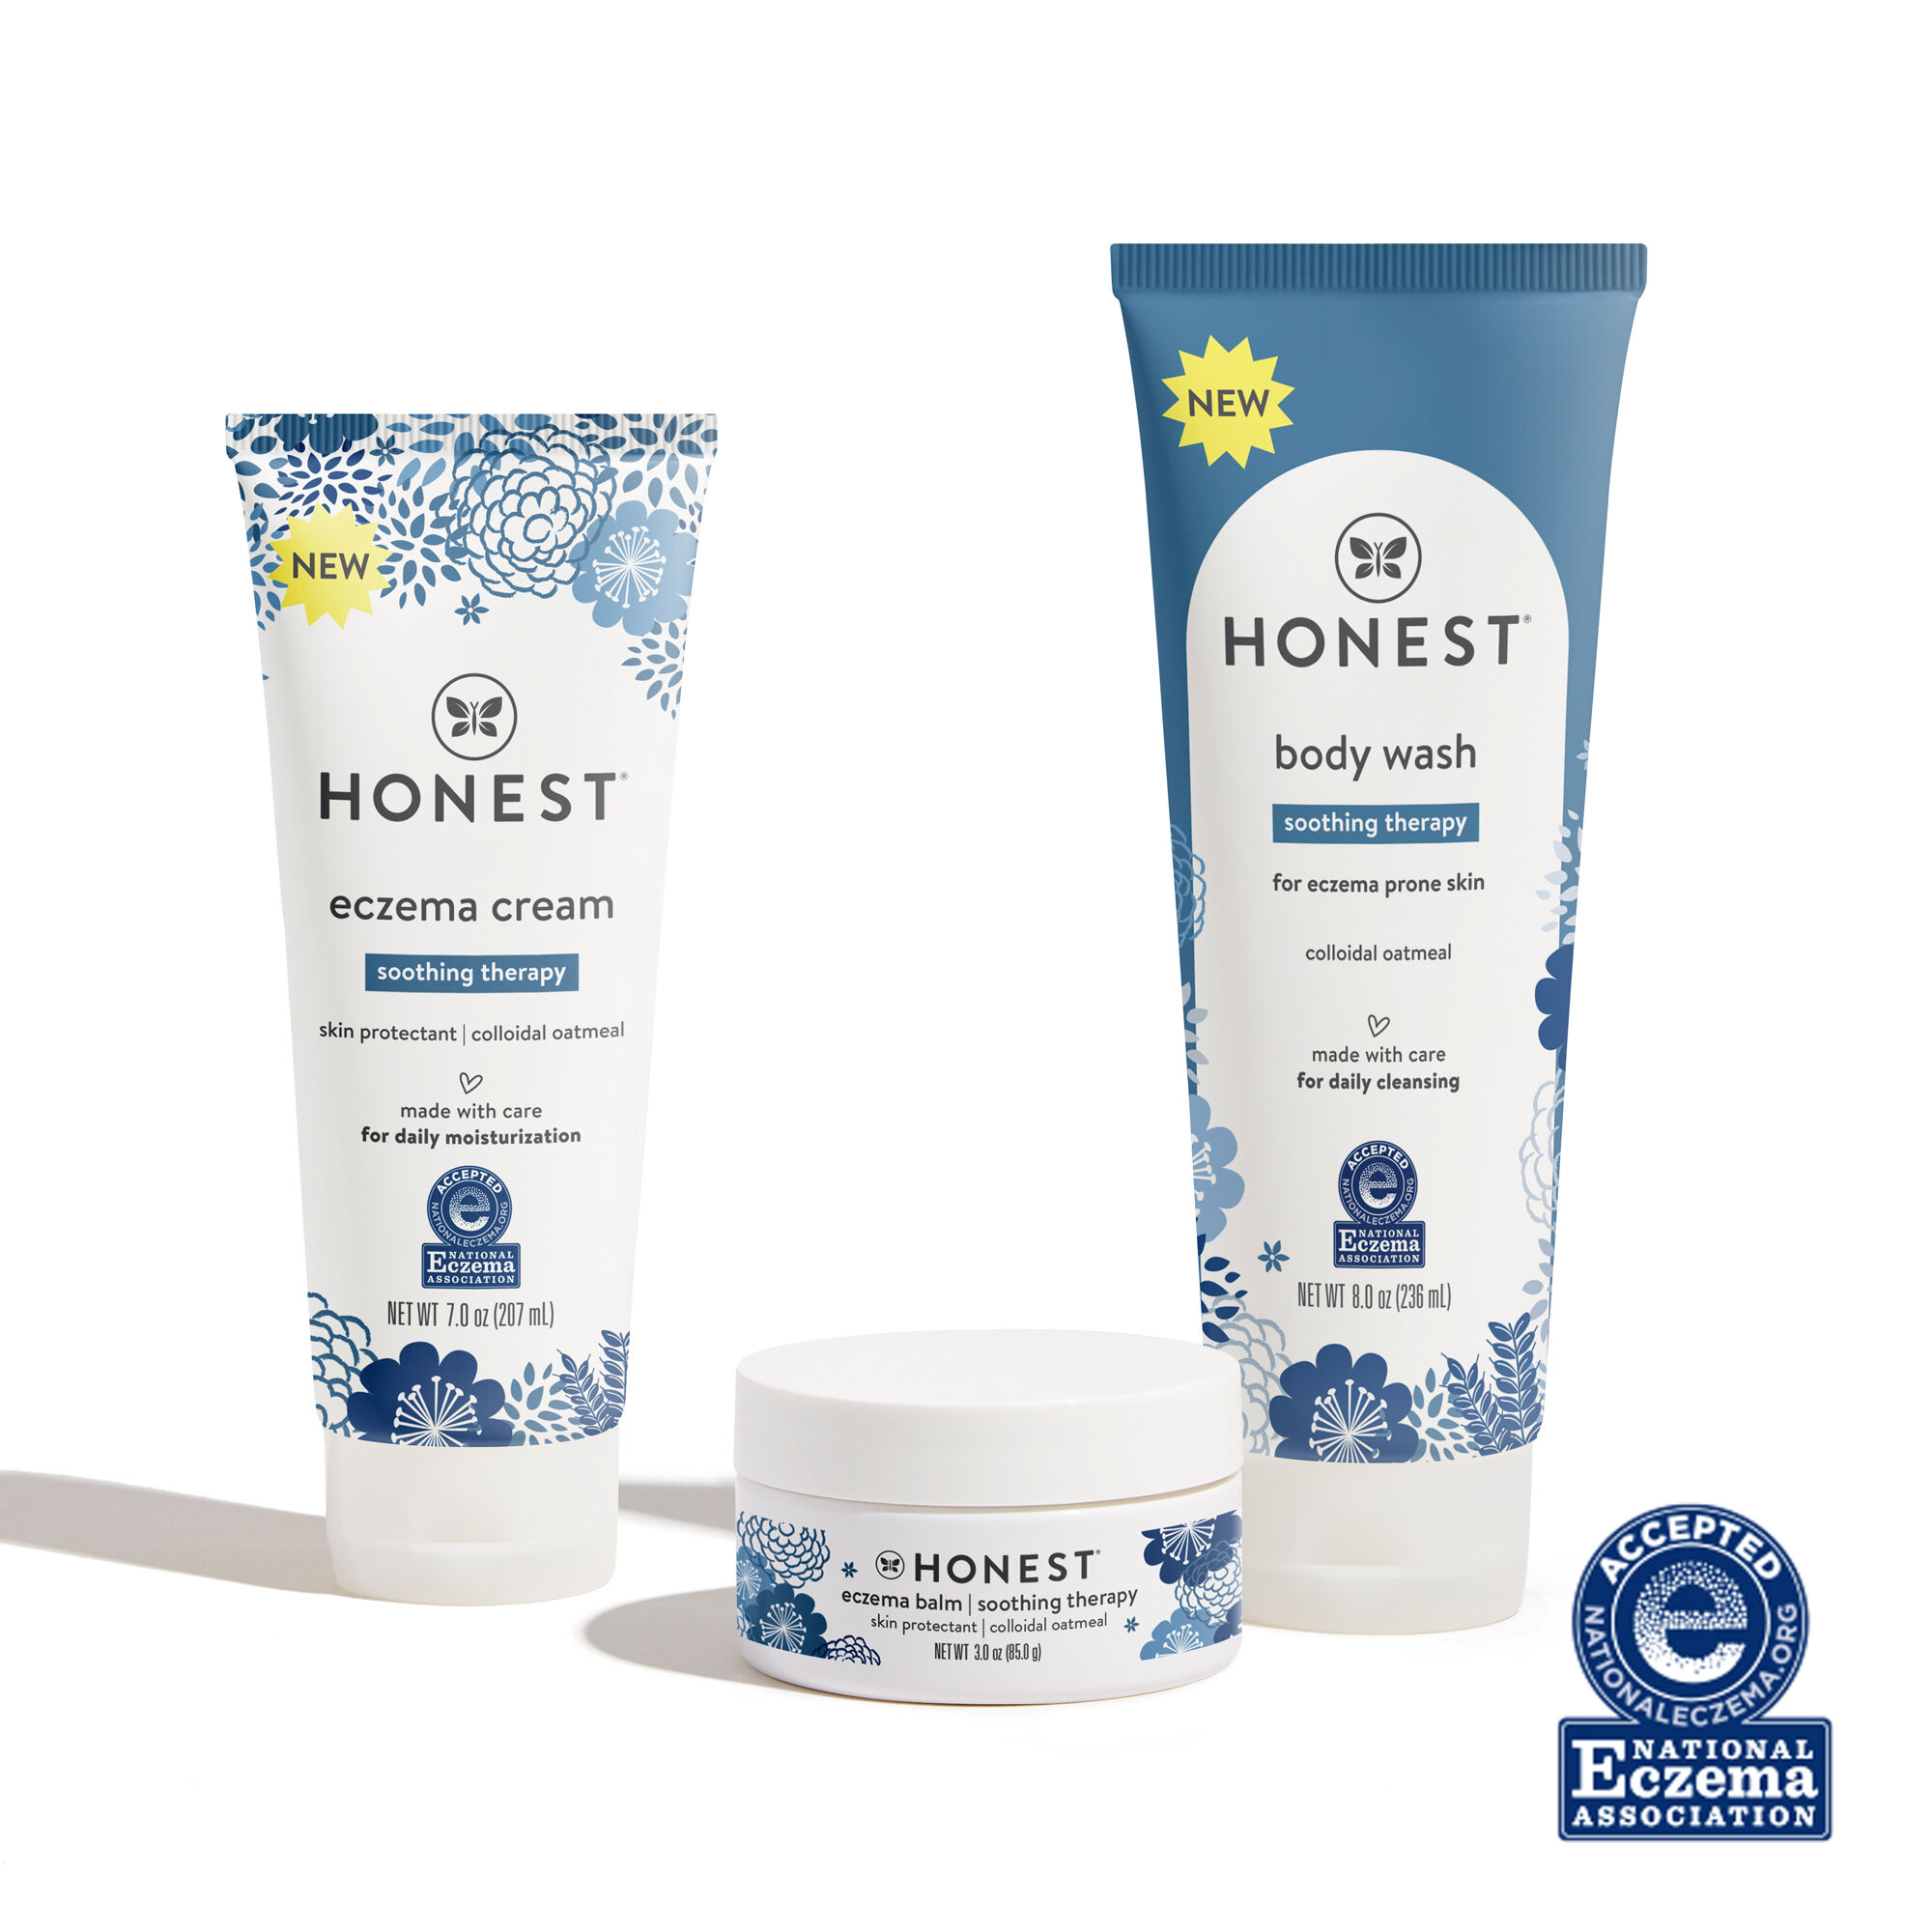 Honest Launches Soothing Therapy Line for Babies with Sensitive Skin